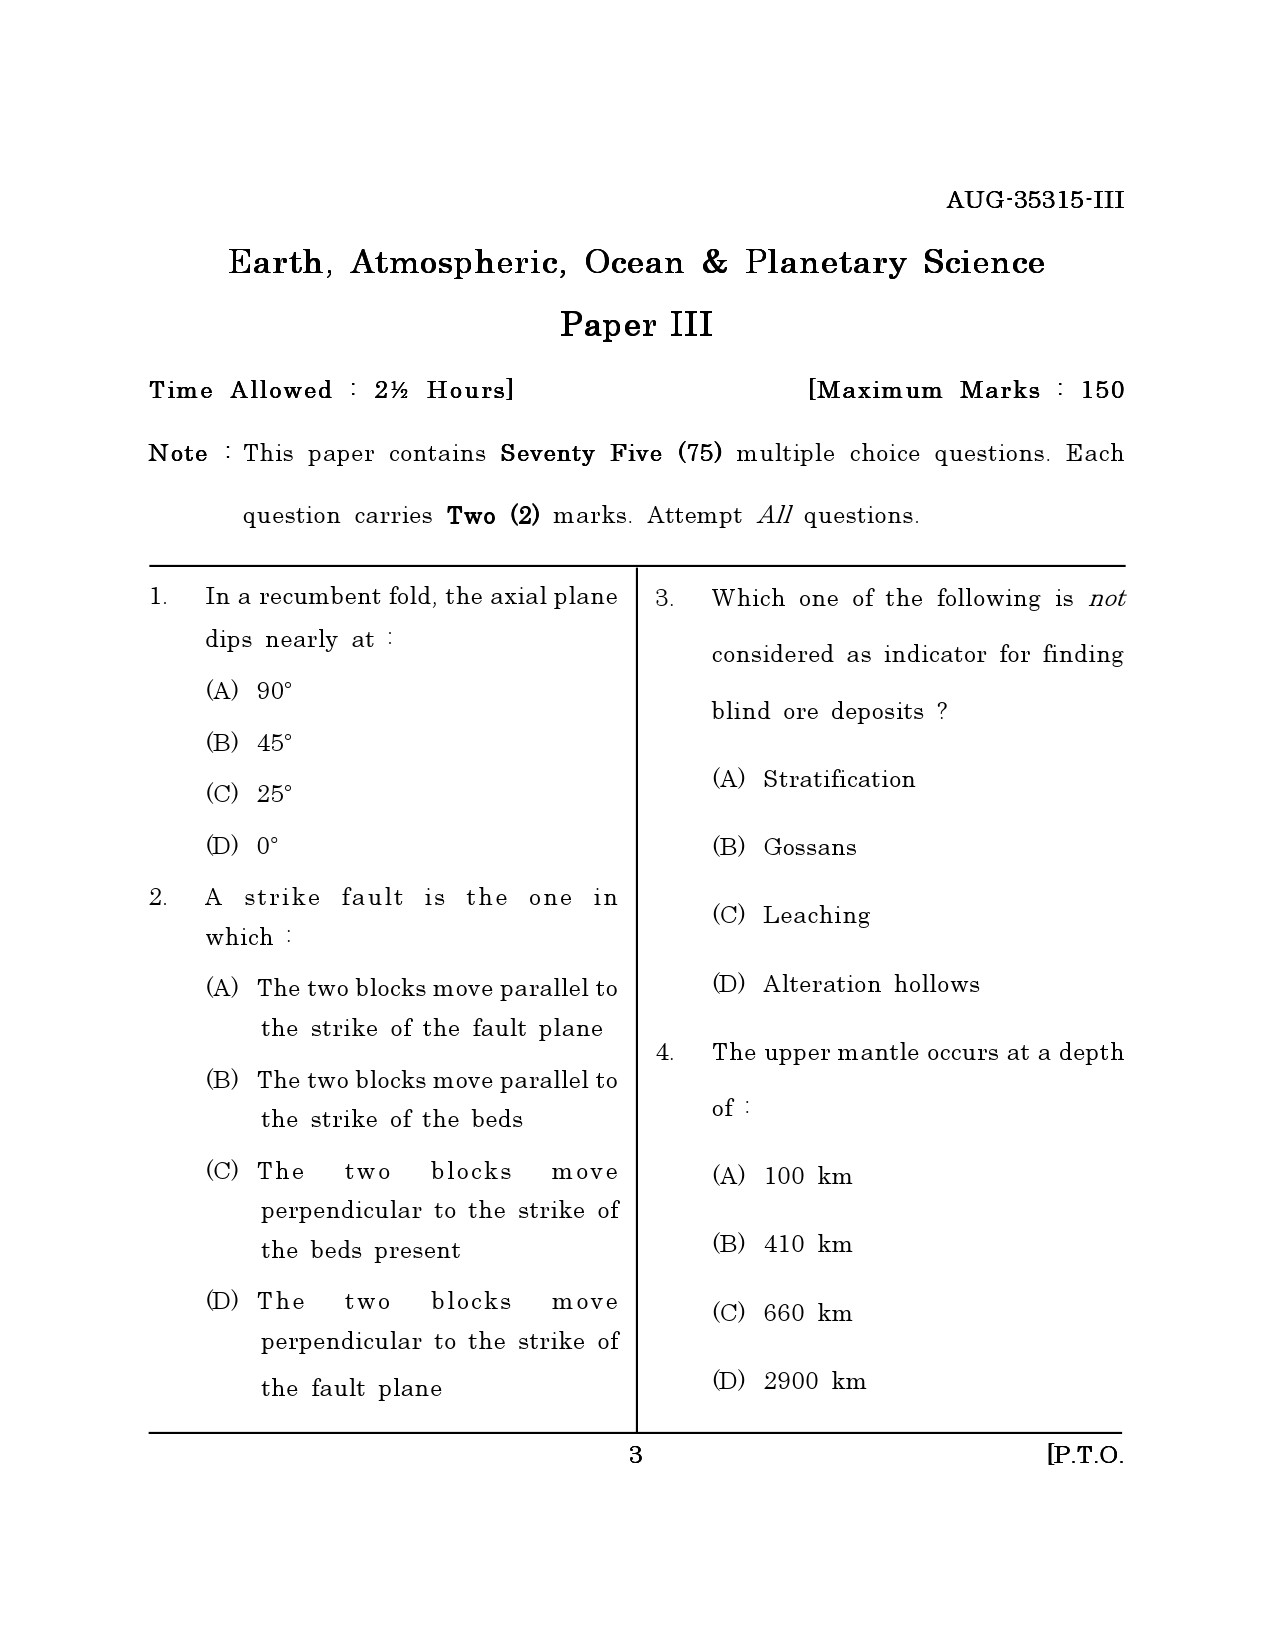 Maharashtra SET Earth Atmospheric Ocean Planetary Science Question Paper III August 2015 2